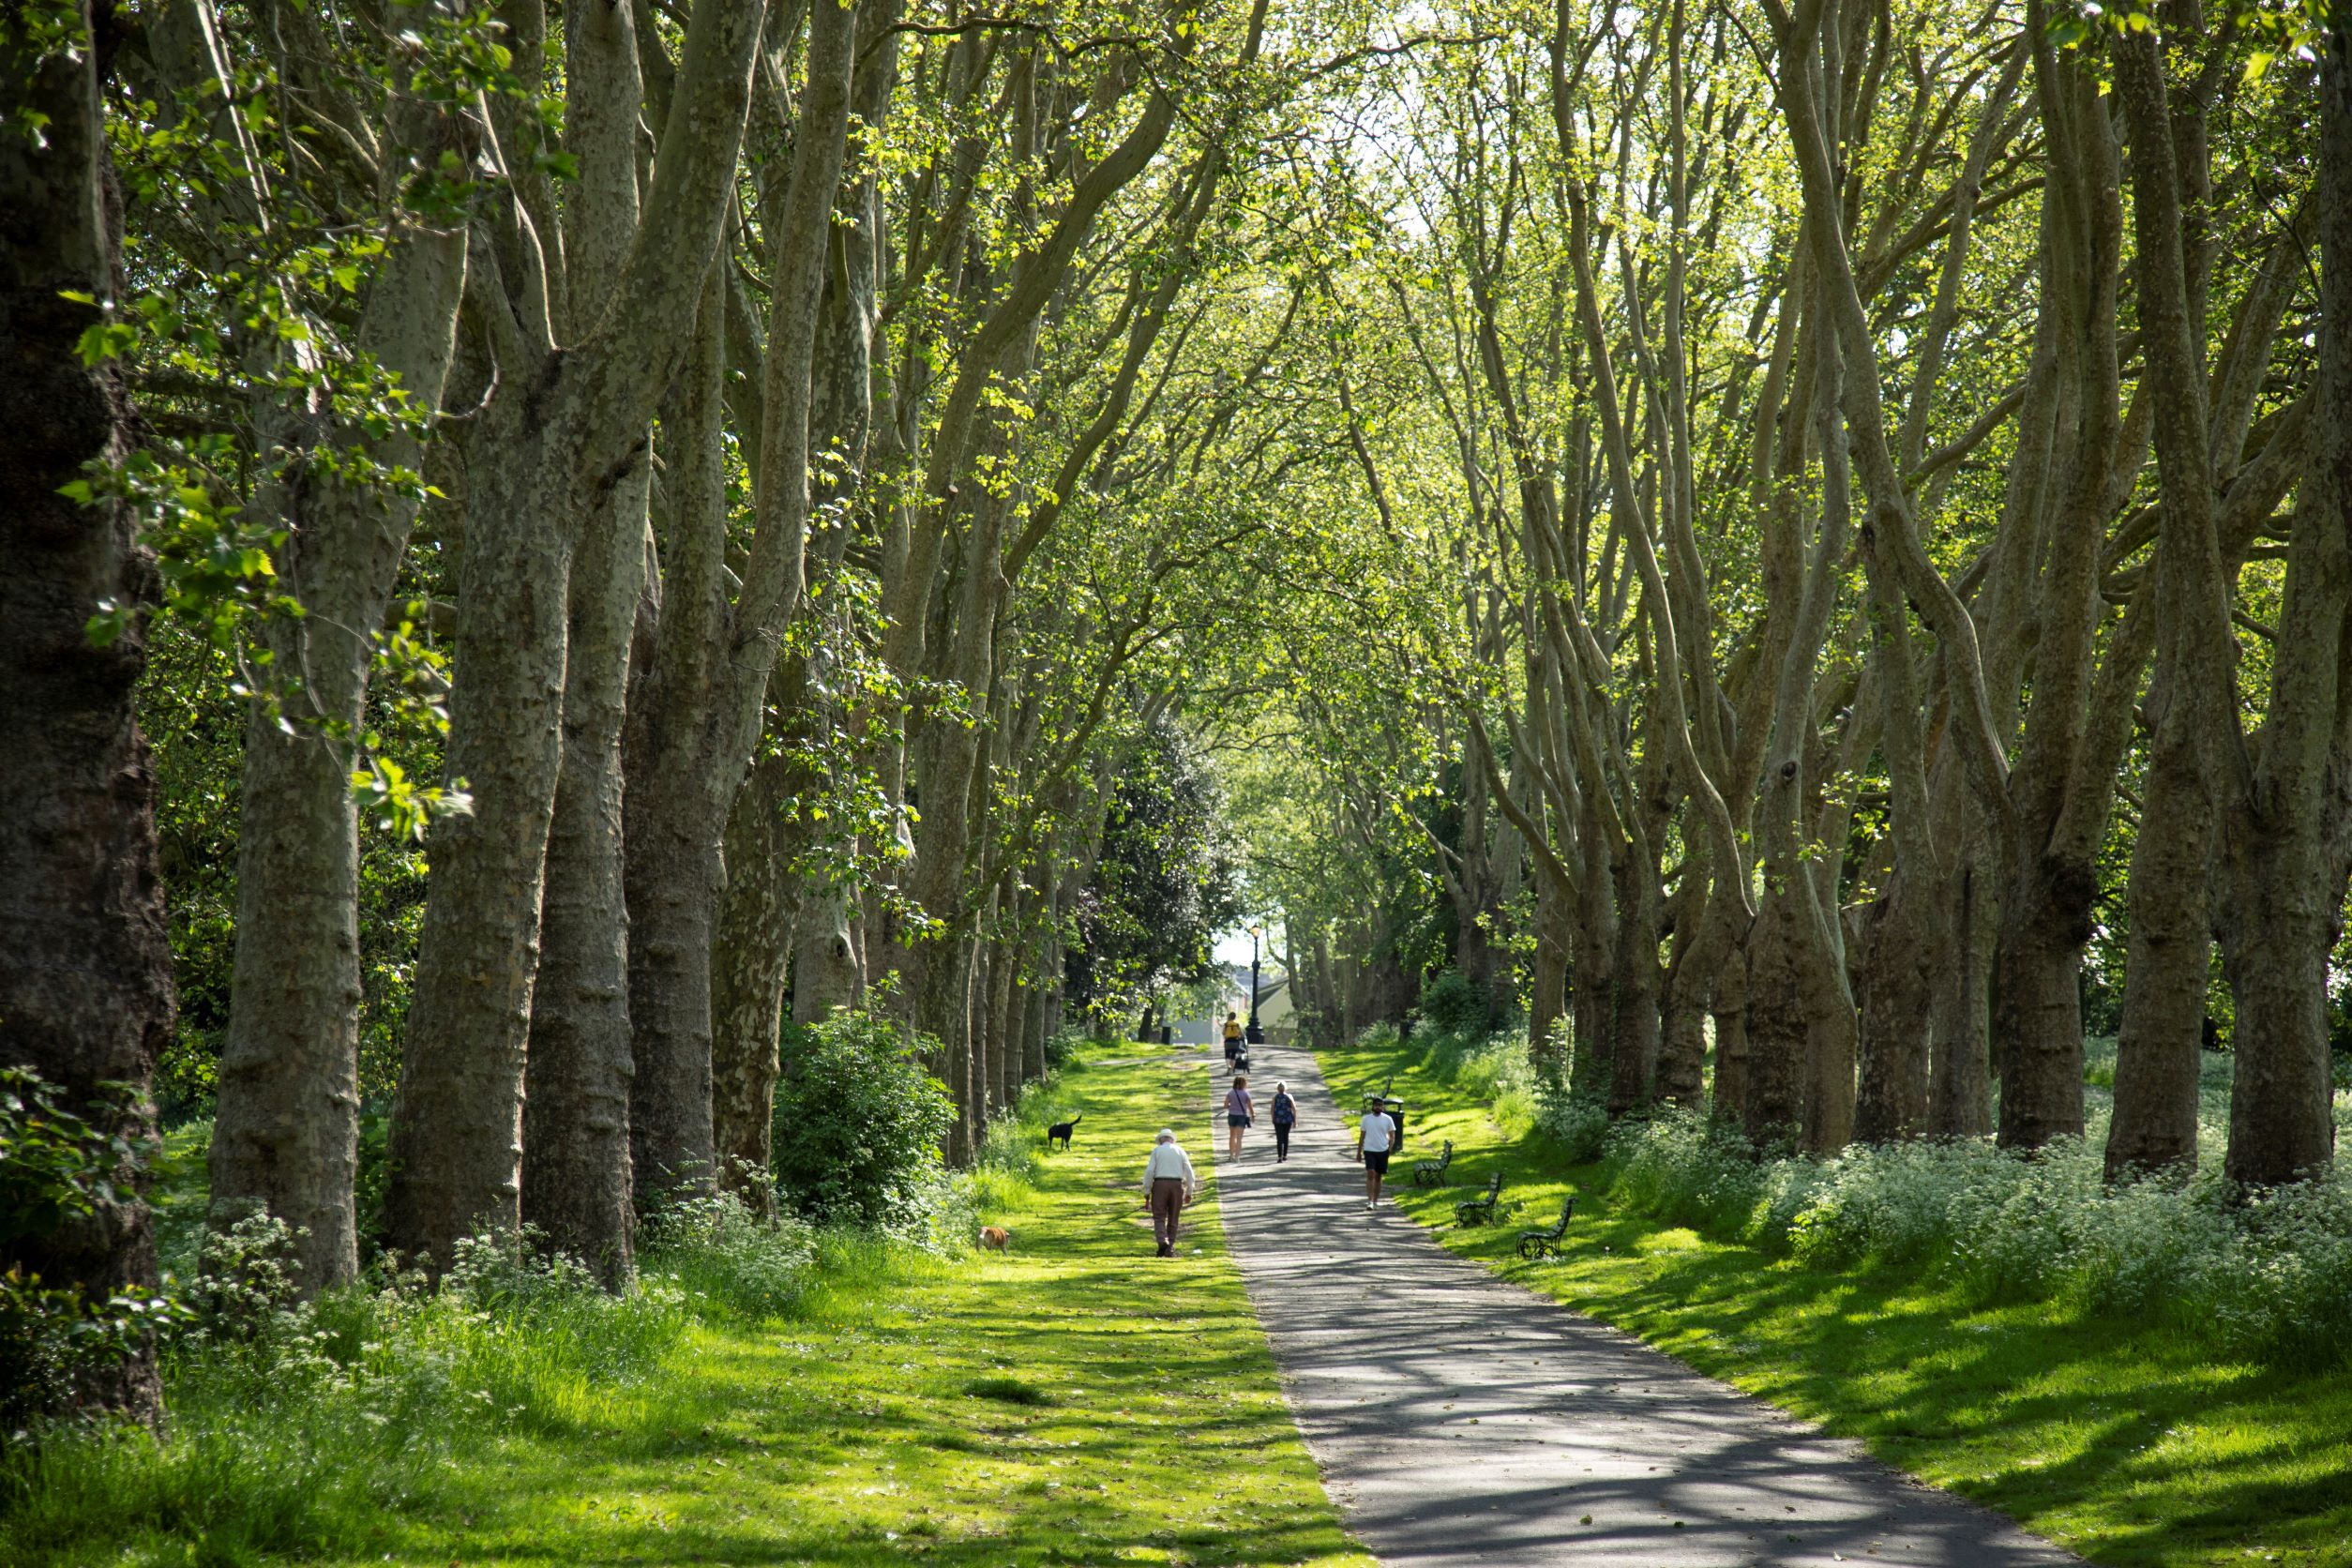 St Georges Park showing trees and dappled light on the pathway with dog walkers in the distance